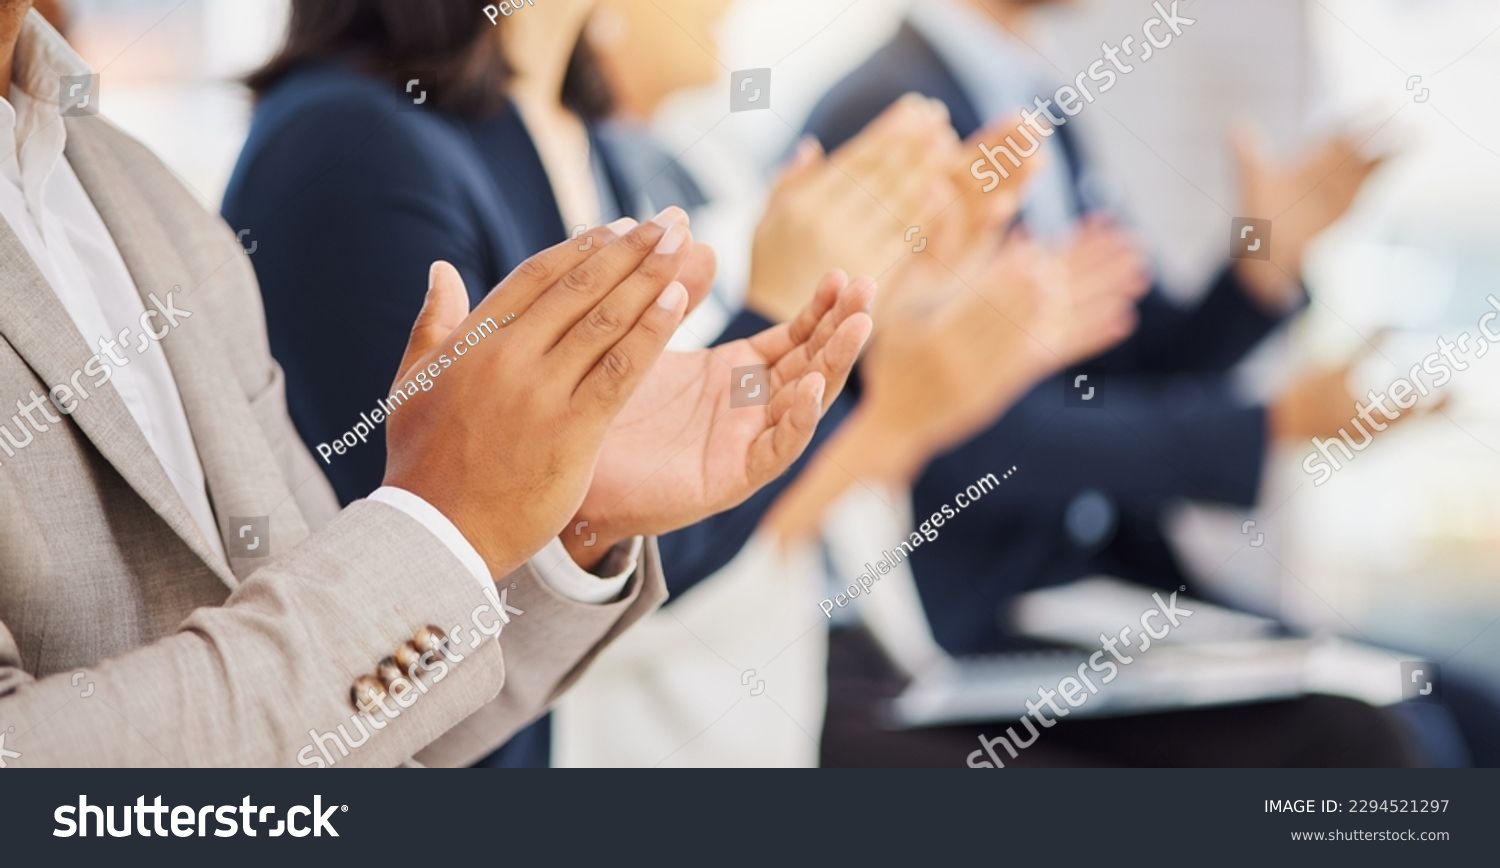 Audience row, hands or office team applause for congratulations, promotion winner or company growth. Trade show, conference meeting and seminar people clapping for convention presentation #2294521297